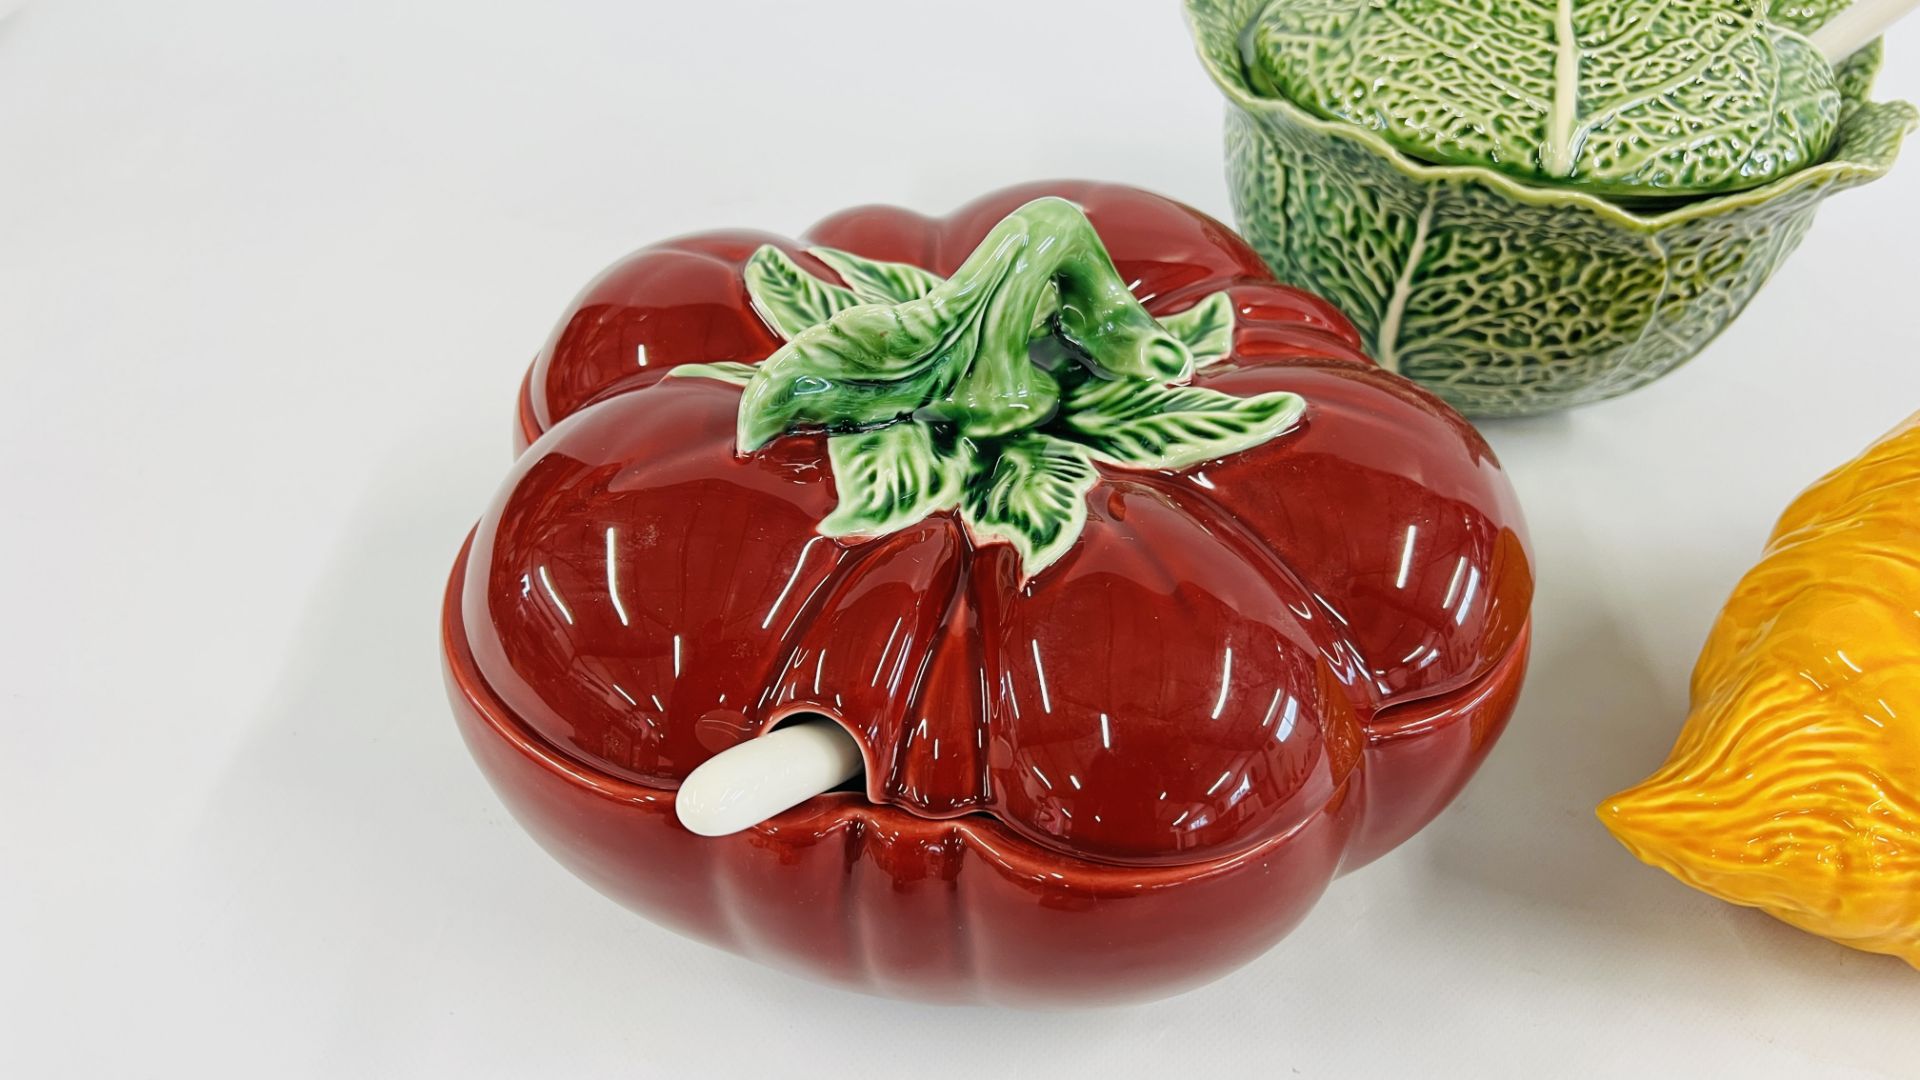 3 X BORDALLO PINHEIRO PORTUGUESE TUREENS TO INCLUDE A CABBAGE, CARROT AND TOMATO EXAMPLE. - Image 3 of 5